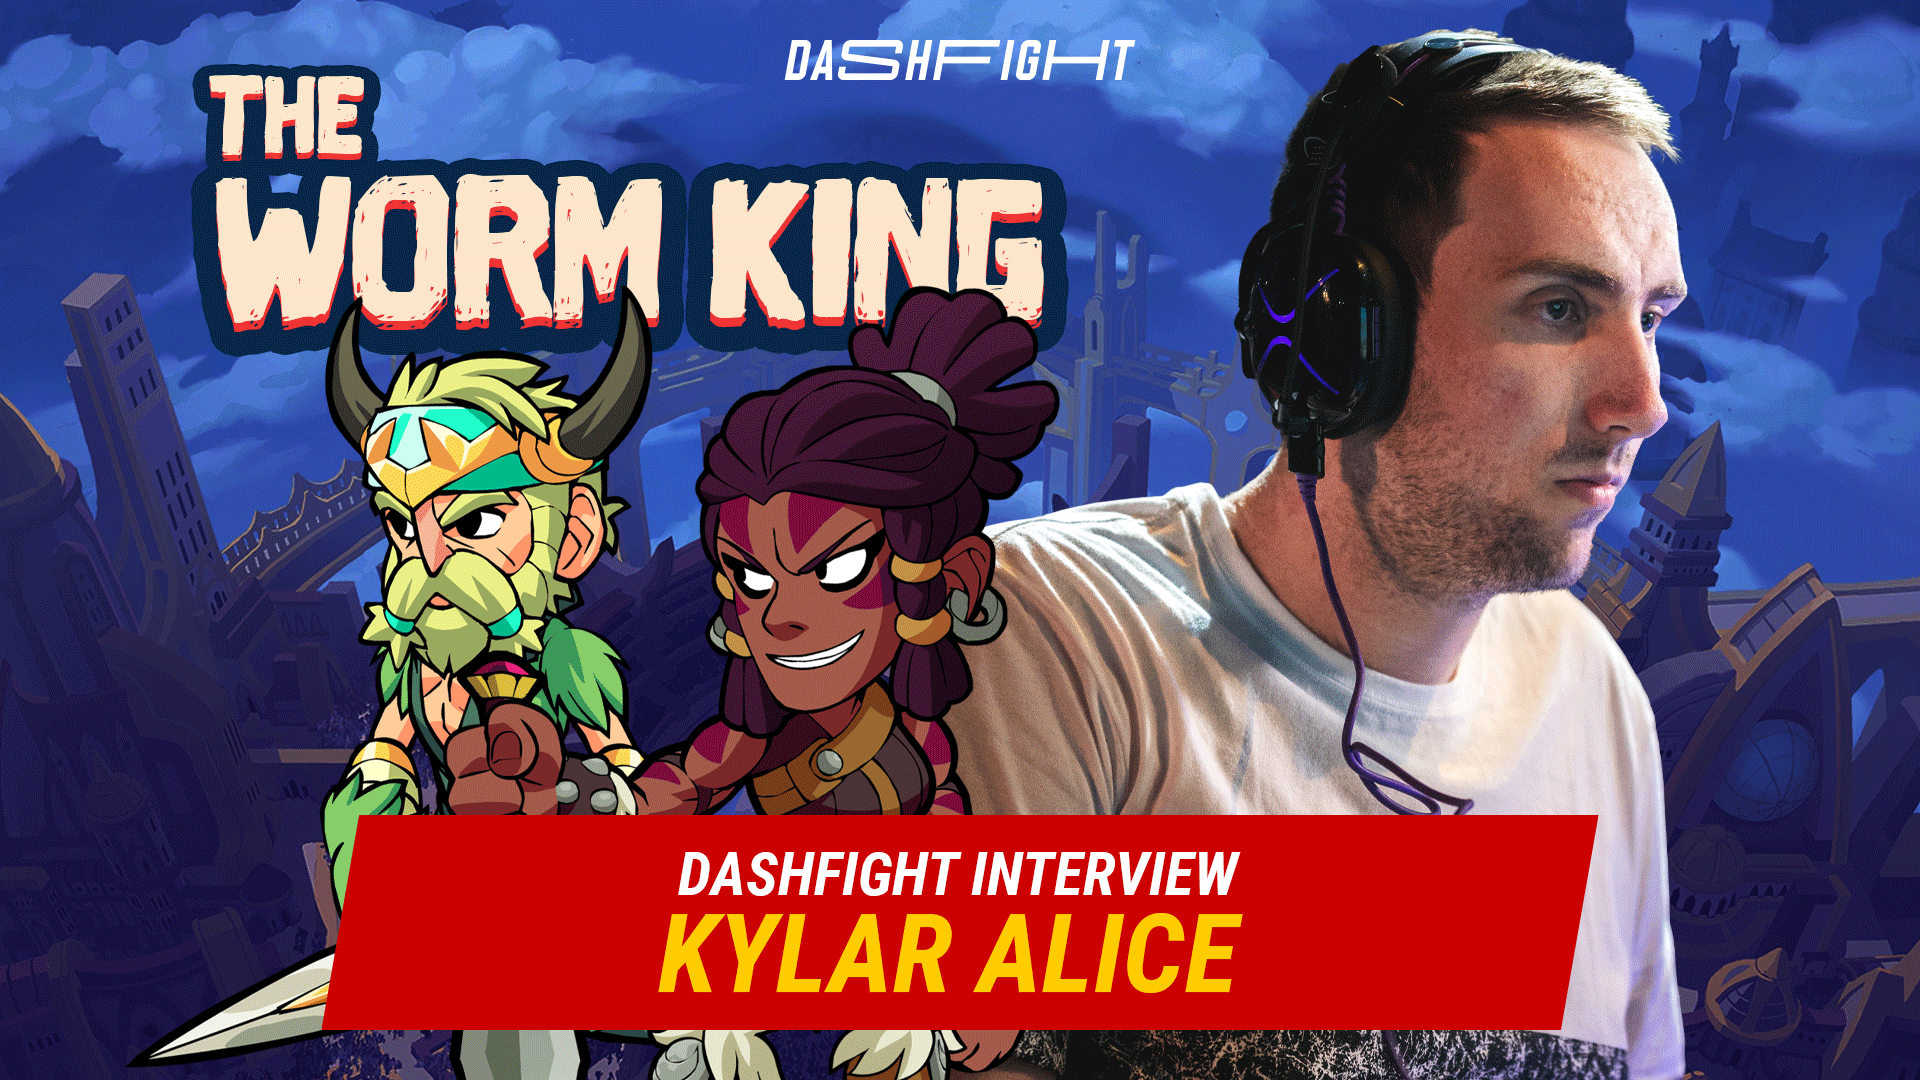 Exclusive interview with Kylar Alice, the winner of Brawlhalla World Championship 2021 in Australia